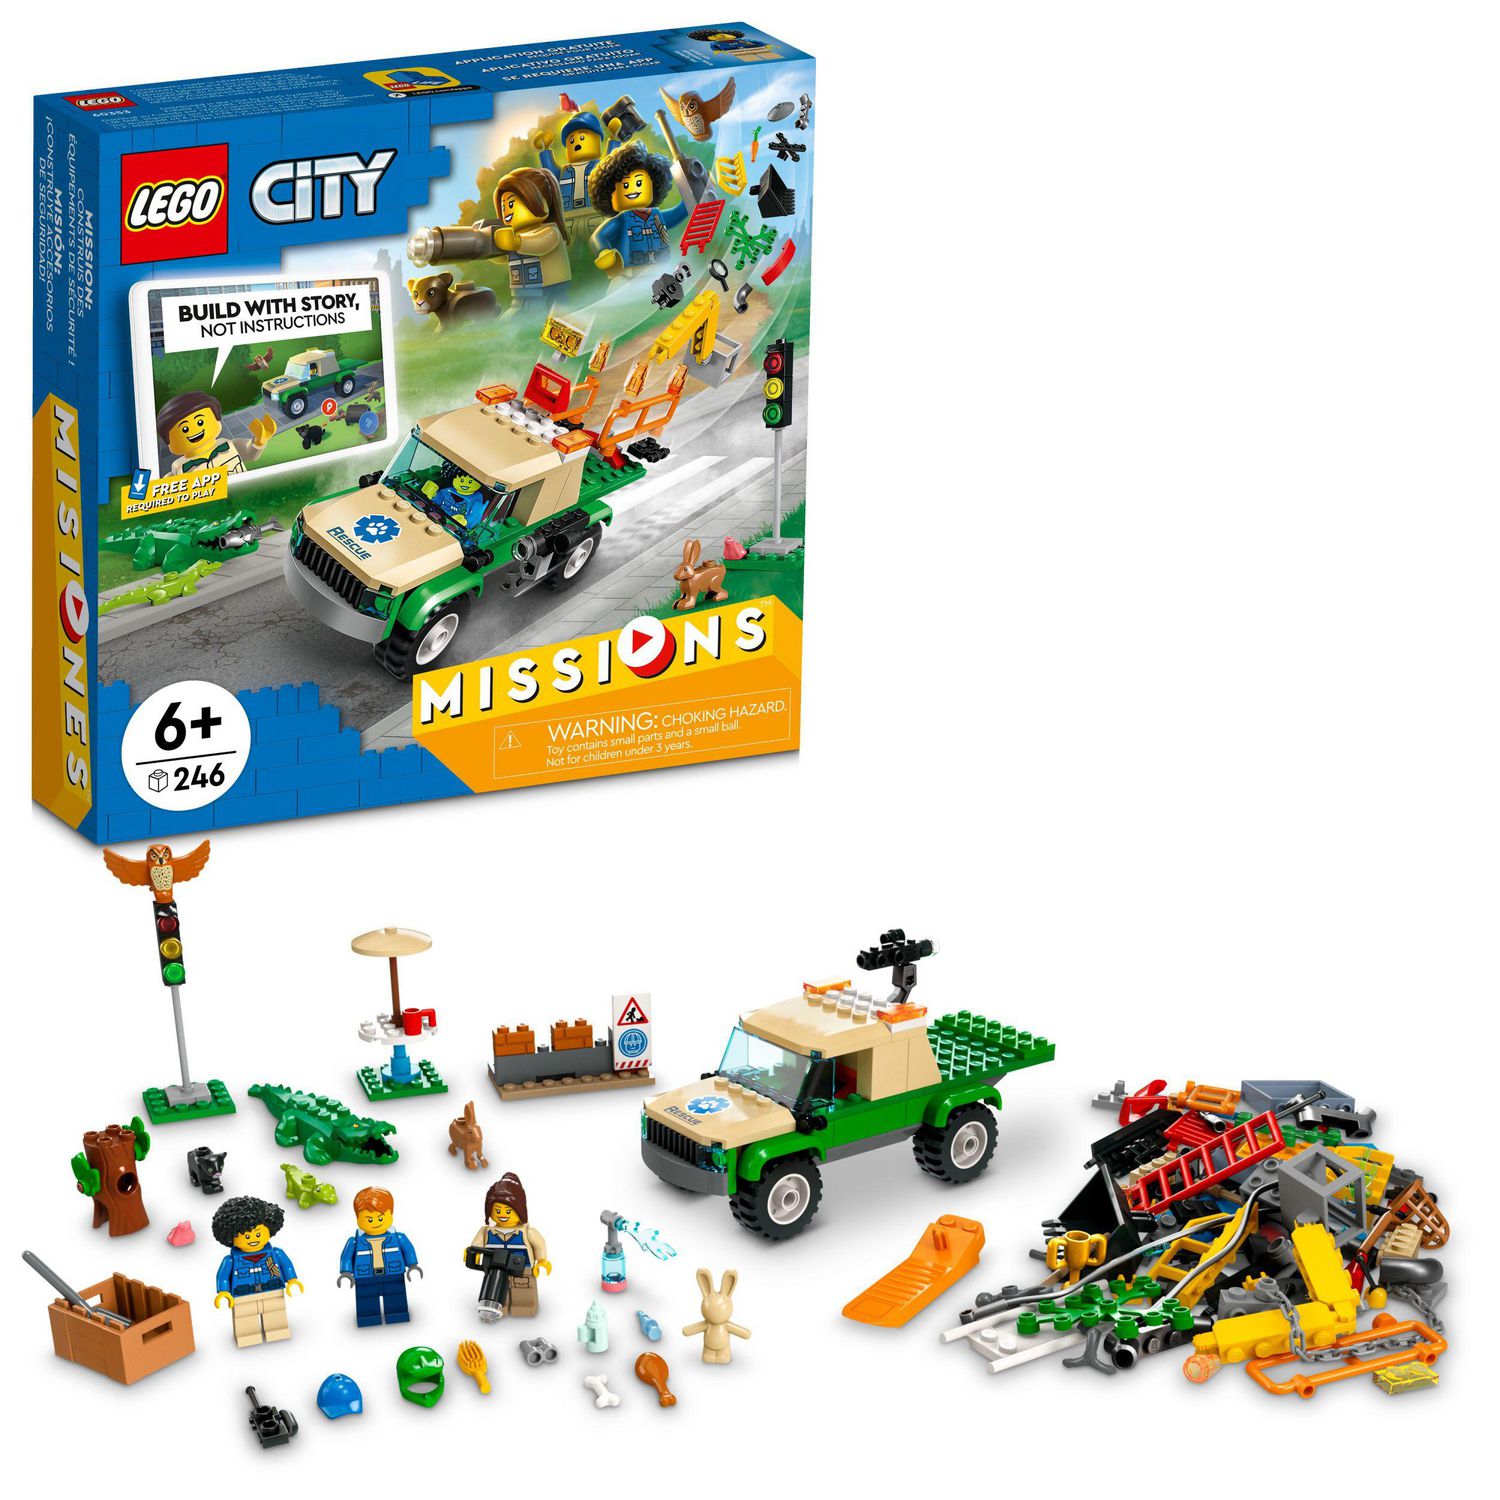 LEGO City Missions Wild Animal Rescue Missions 60353 Toy Building Kit (246  Pieces), Includes 246 Pieces, Ages 6+